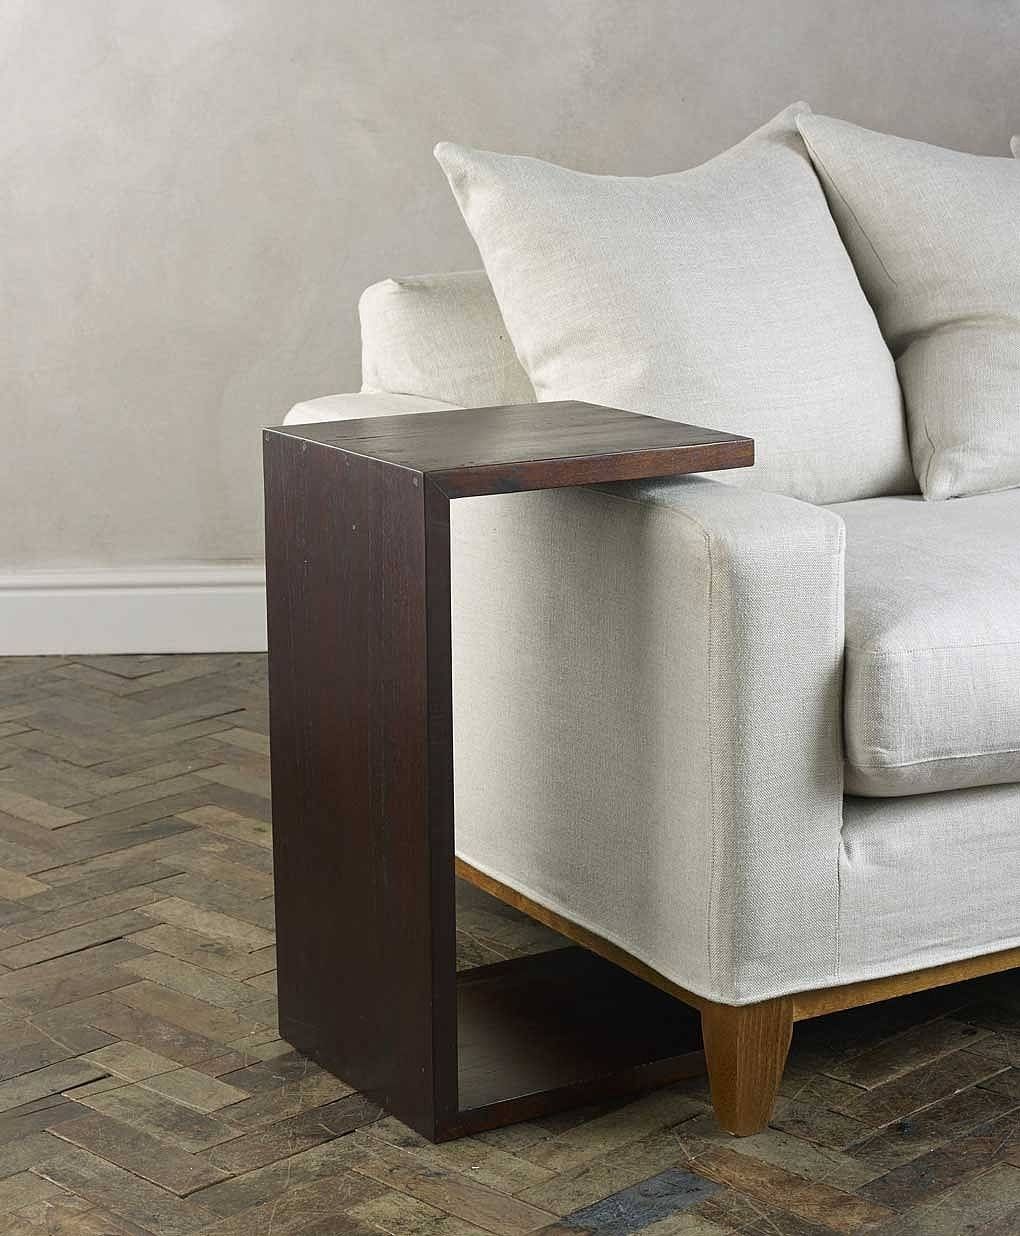 Sofas Center : Impressive Sofa Side Table Picture Concept With Pertaining To Sofa Side Tables With Storages (View 8 of 30)